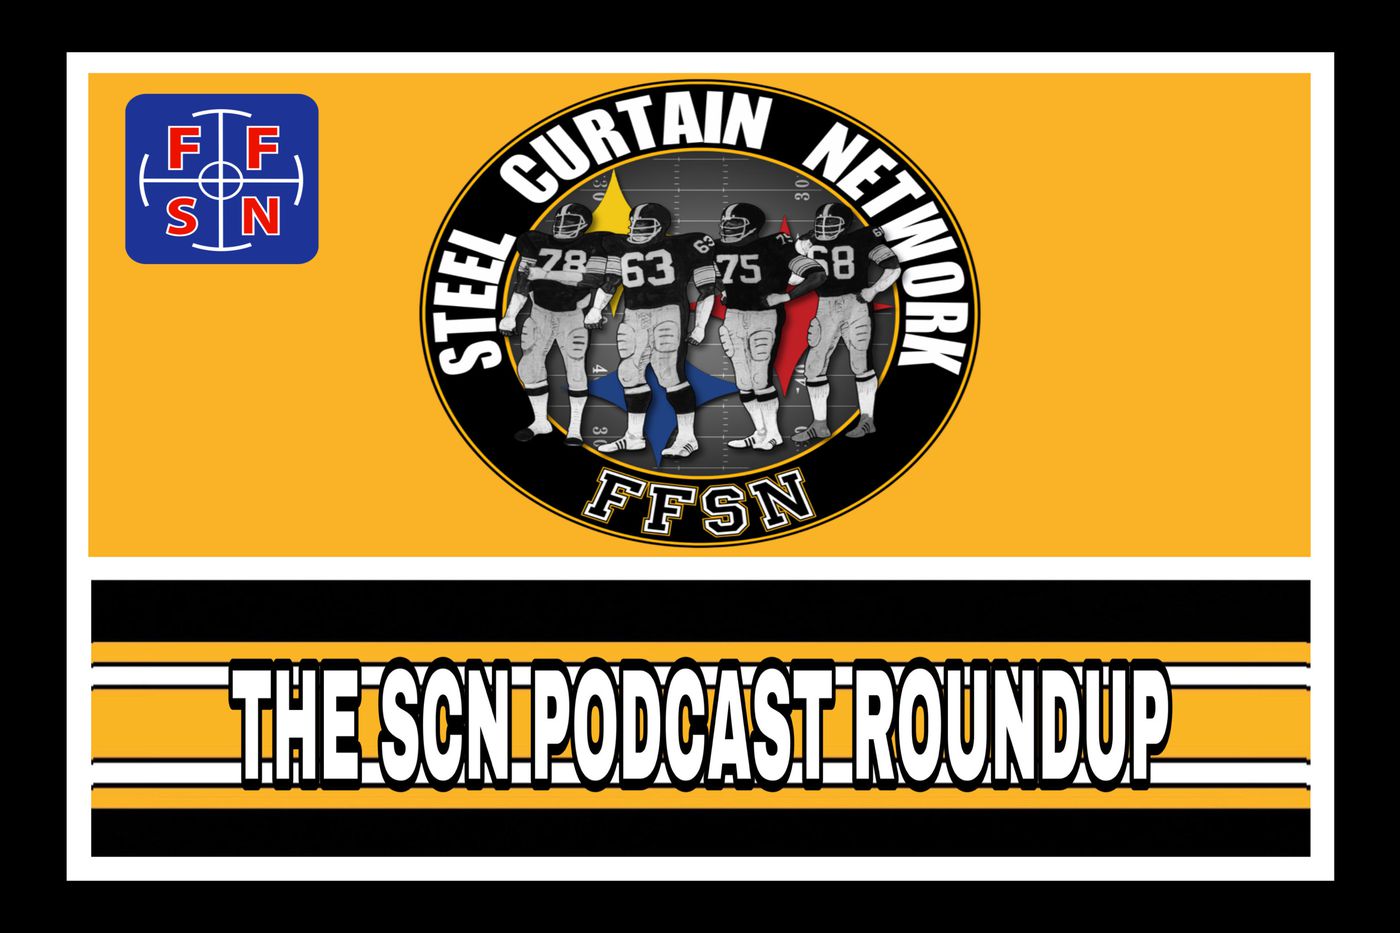 Pittsburgh Steelers podcasts are the latest in the SNN family